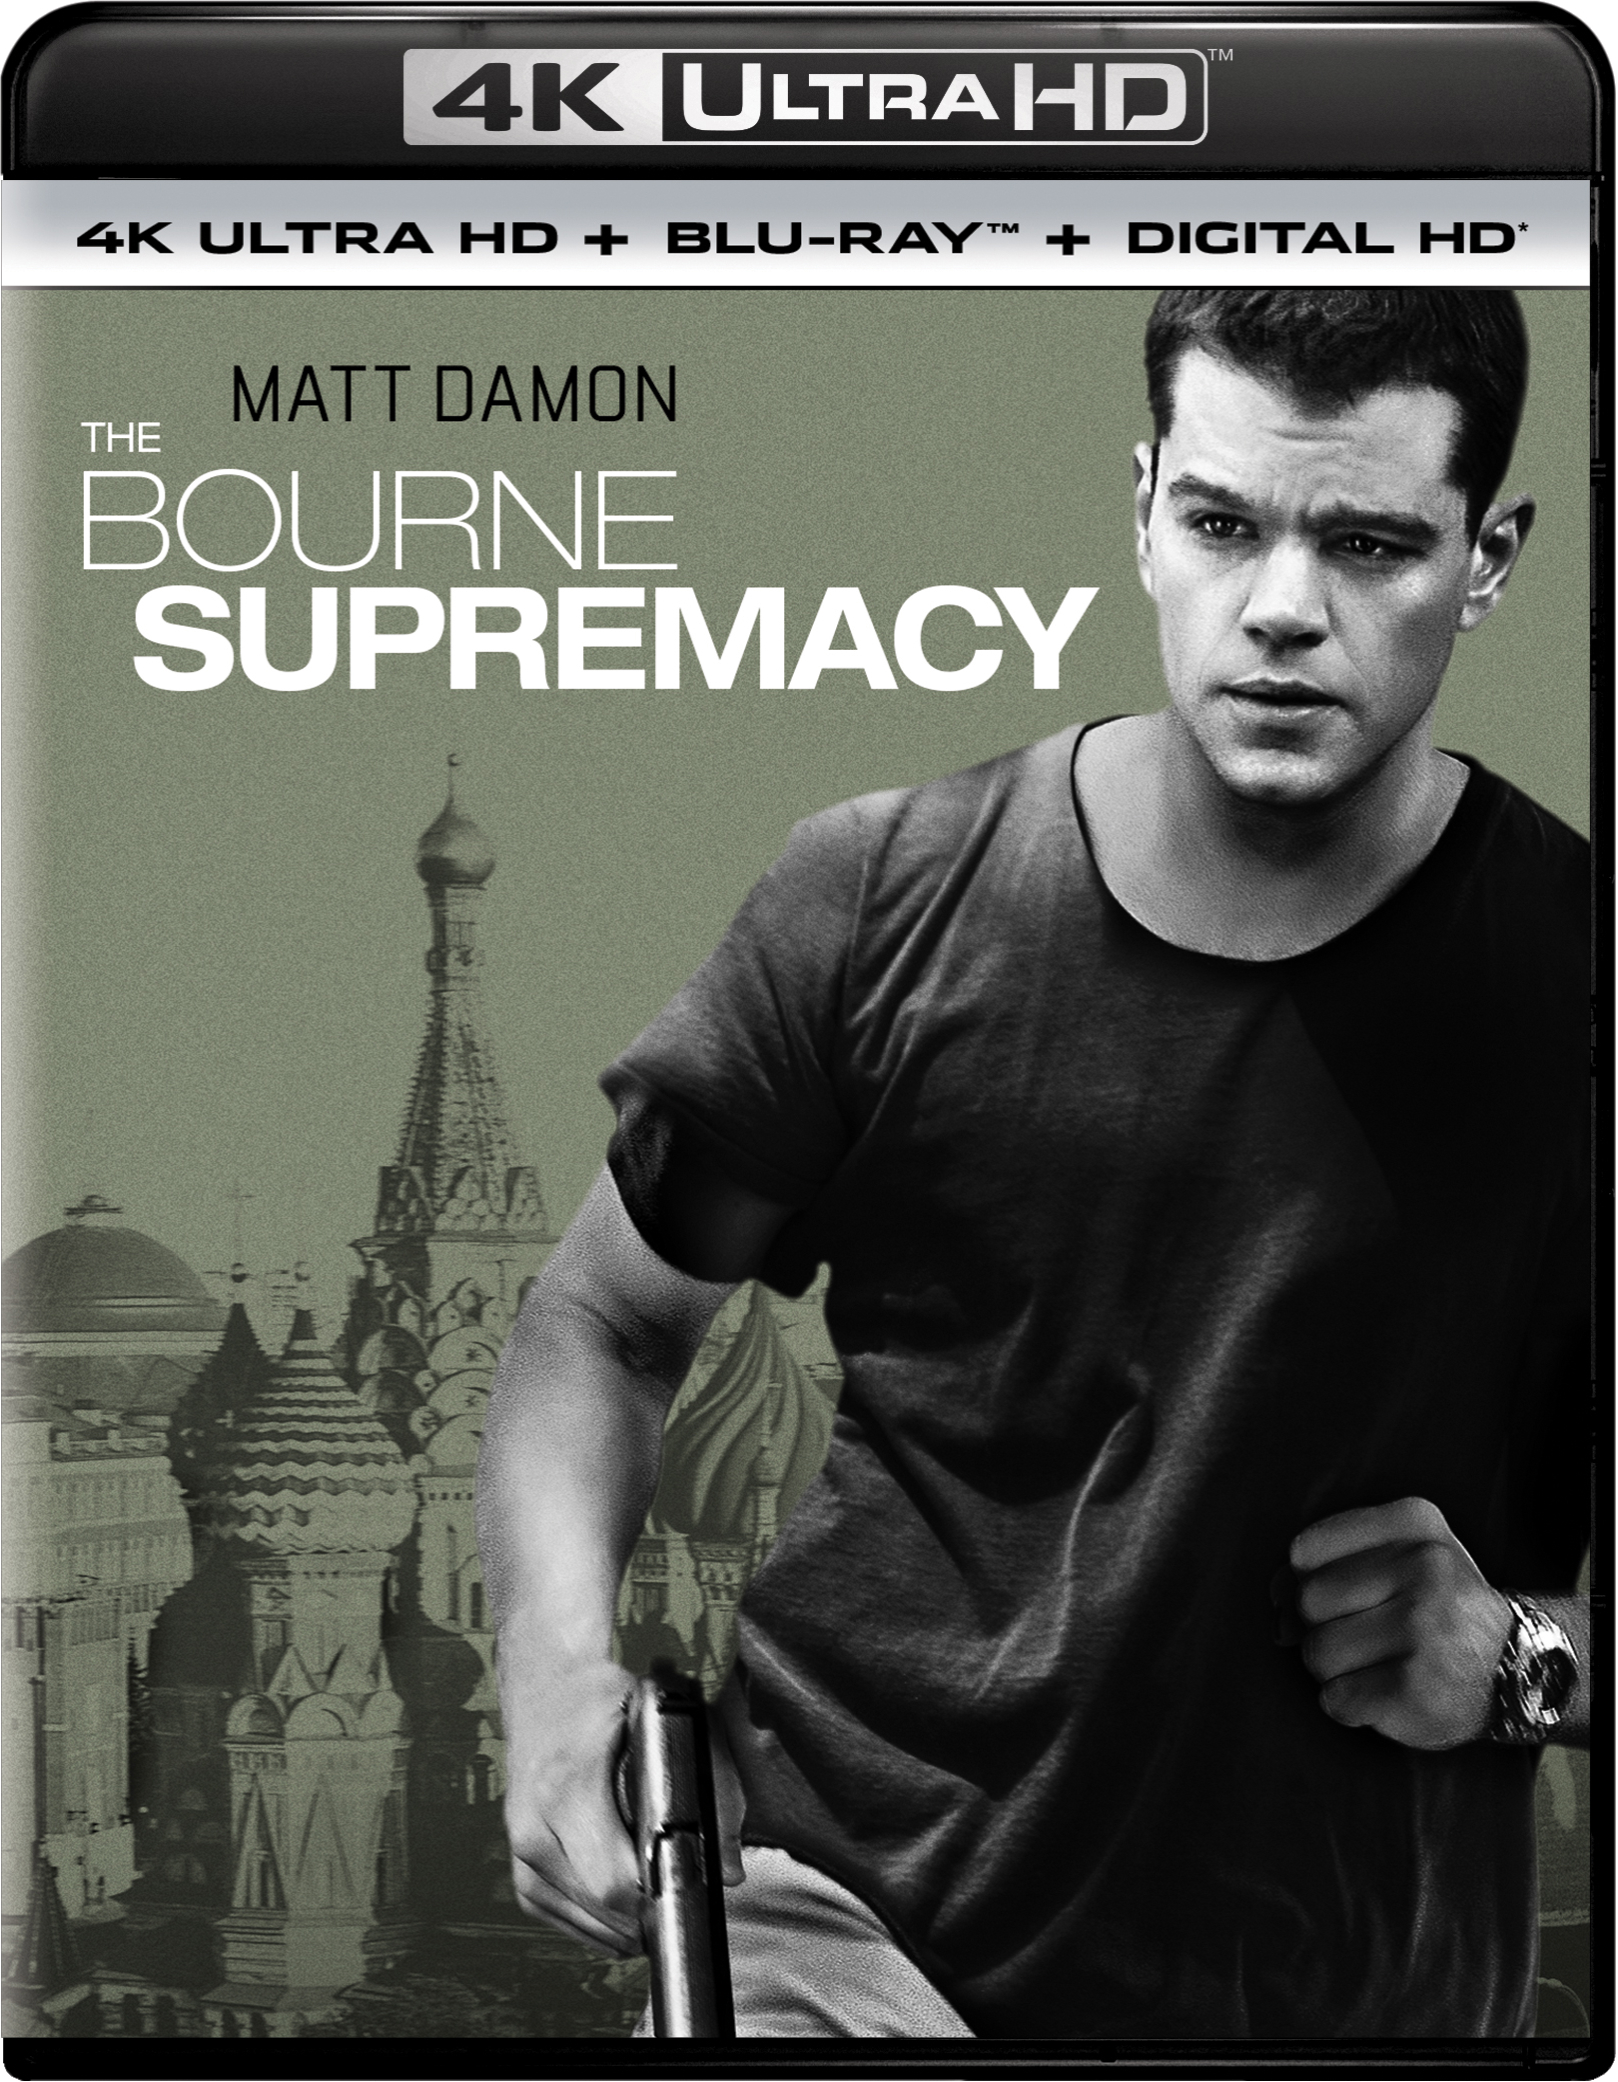 The Bourne Supremacy (4K Ultra HD) - UHD [ 2004 ]  - Thriller Movies On 4K Ultra HD Blu-ray - Movies On GRUV